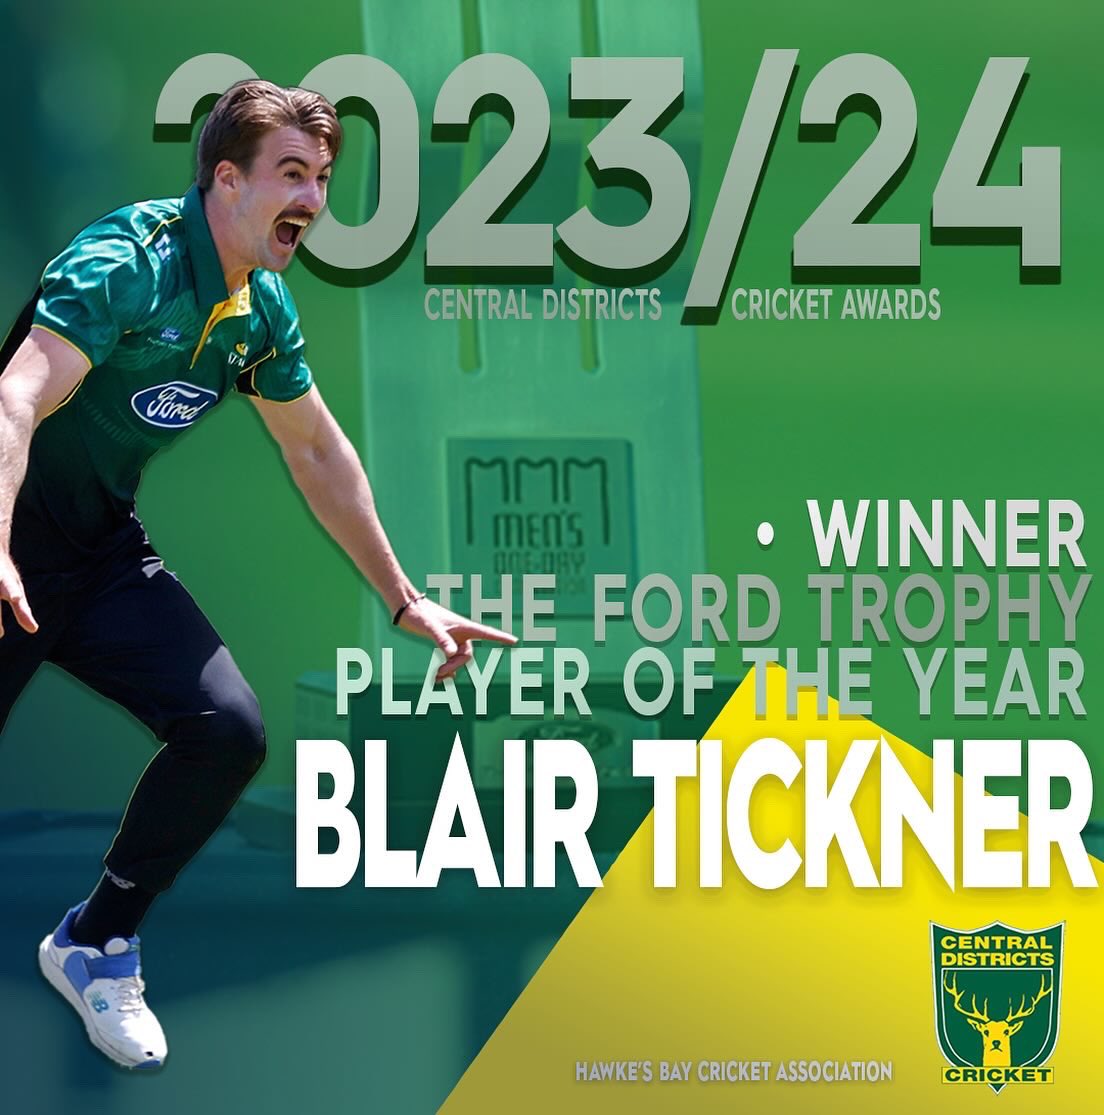 🏆 𝐂𝐃 𝐂𝐑𝐈𝐂𝐊𝐄𝐓 𝐀𝐖𝐀𝐑𝐃𝐒 2024 🏆 Not enough arms for all the trophies this year, and a first-time winner of our supreme trophy for 🦌 POTY, BLAIR TICKNER! 👏‍👏‍👏‍

🟩🟩🟩 #LOVETHESTAGS 
🟩🟩🟩 #BLAIRTICKNER 
🟩🟩🟩 #CDCRICKETAWARDS